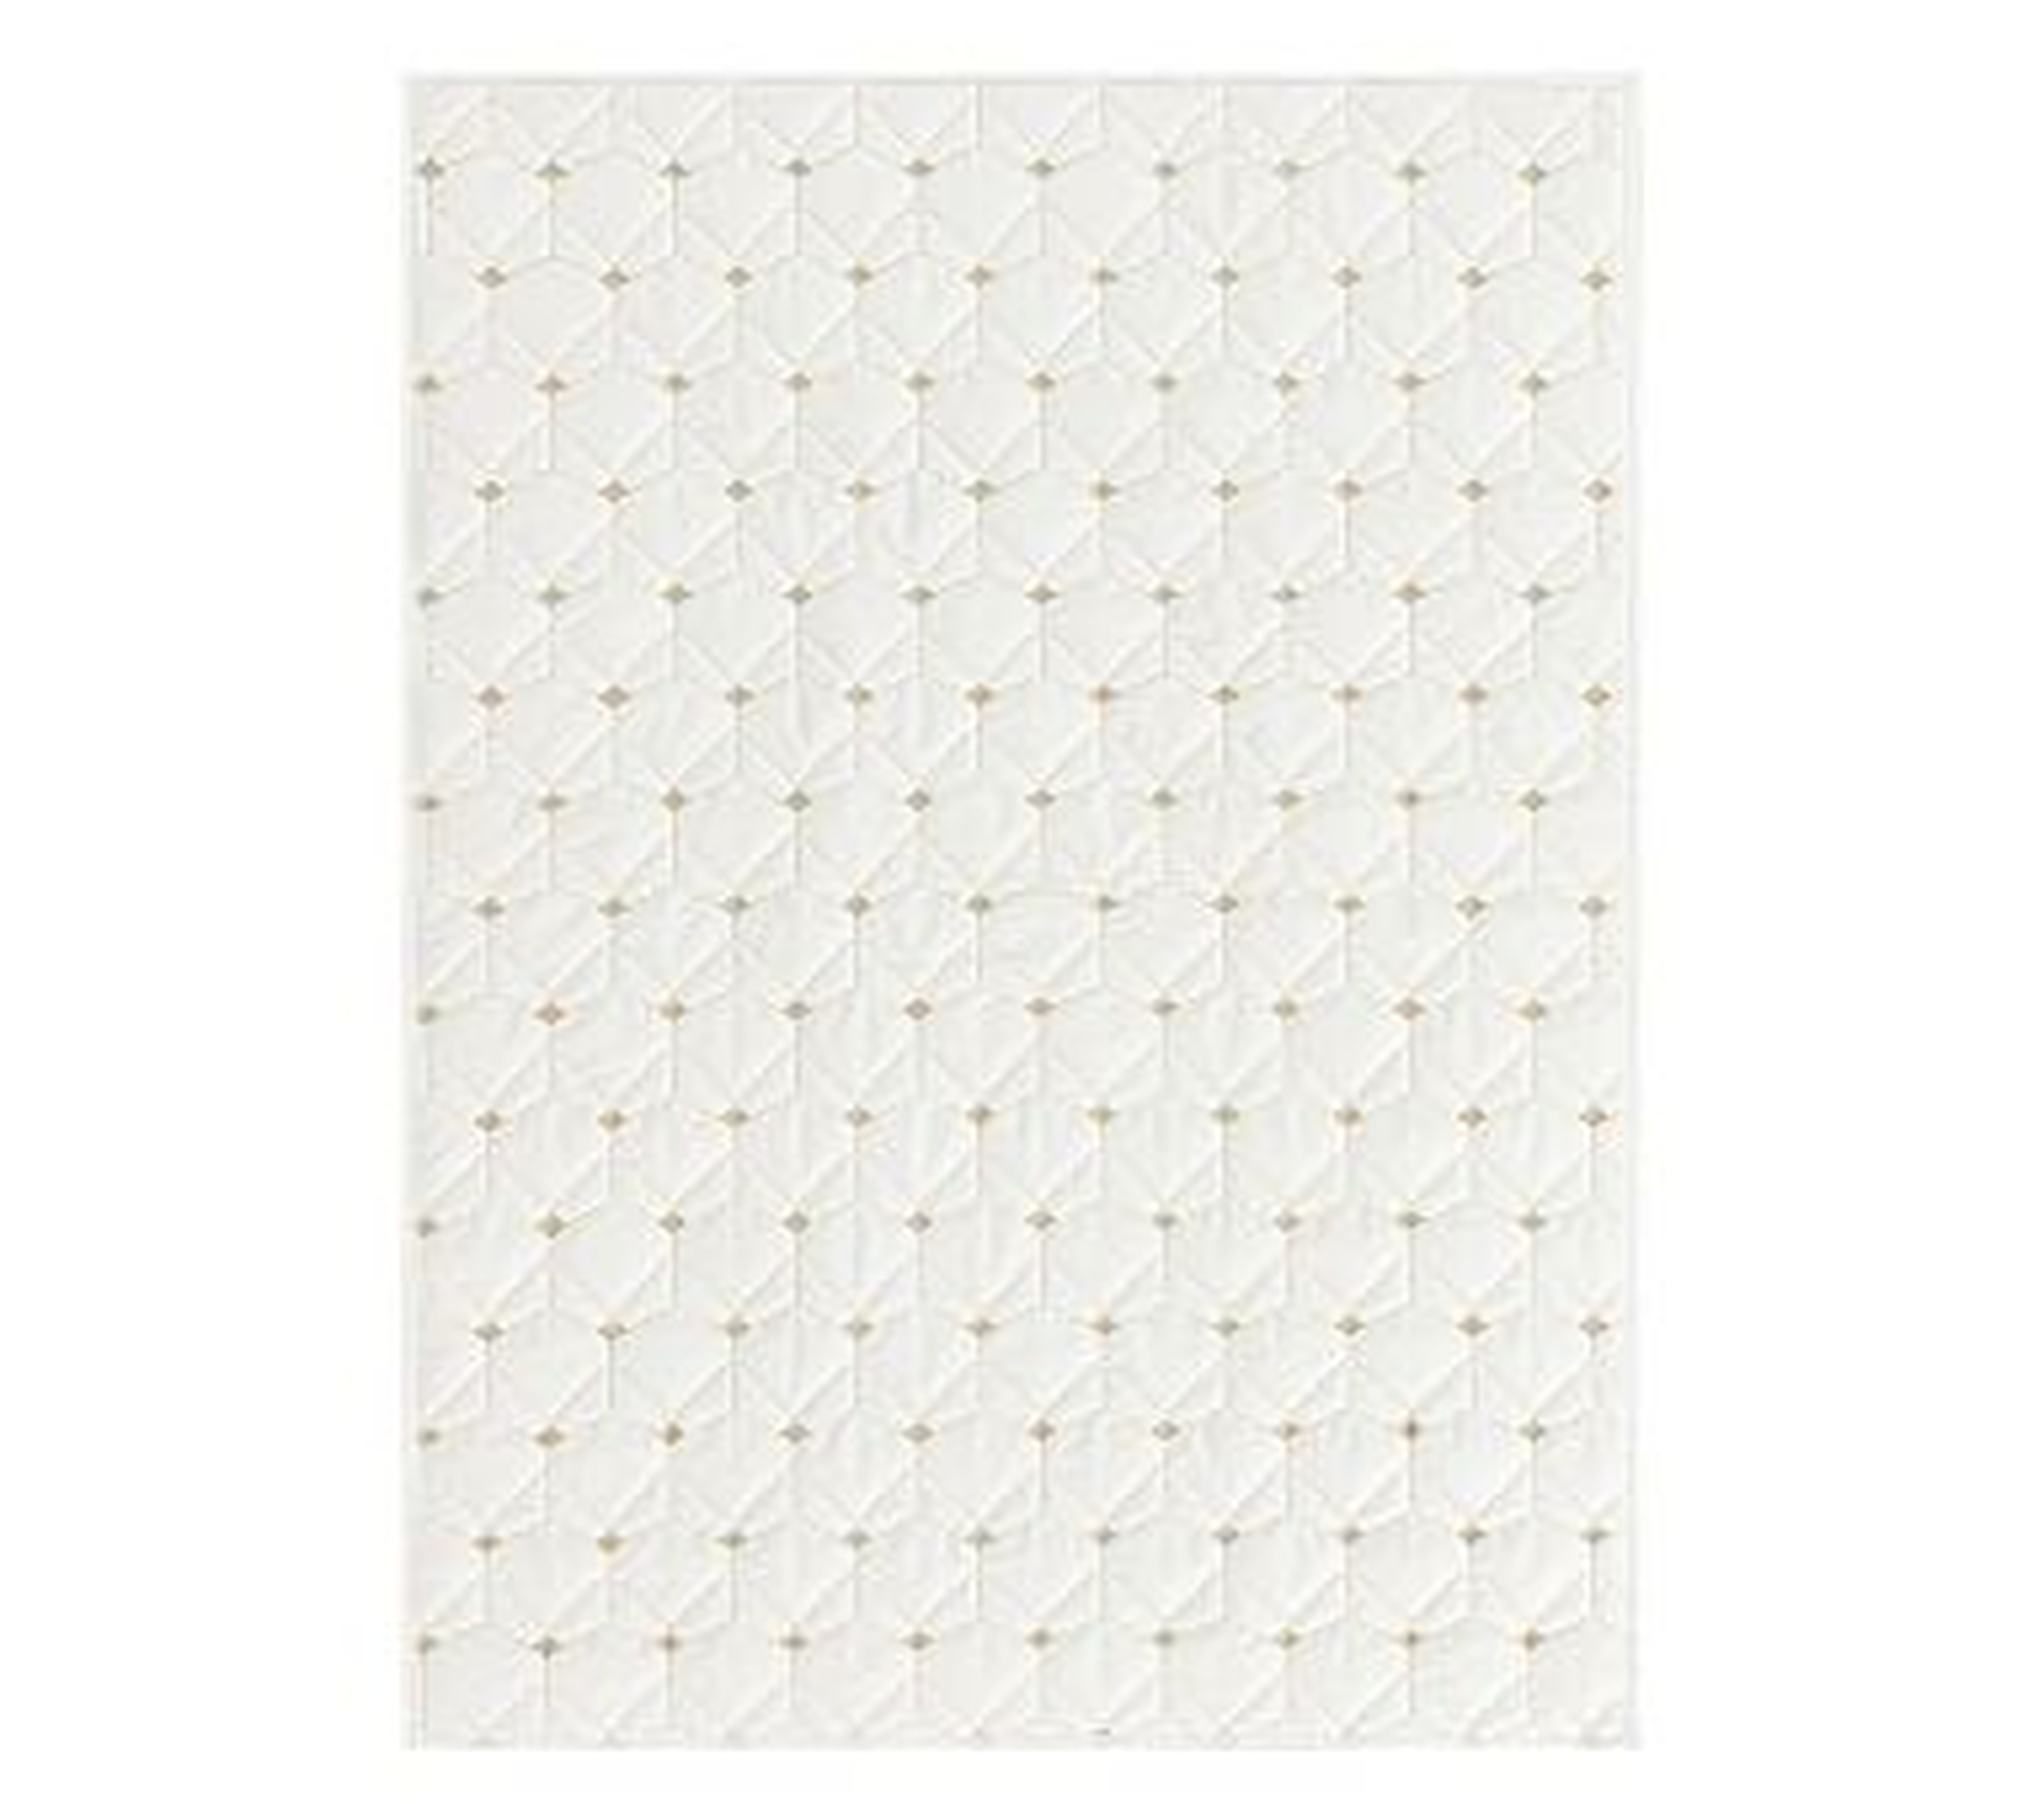 Coco Toddler Quilt, Ivory - Pottery Barn Kids